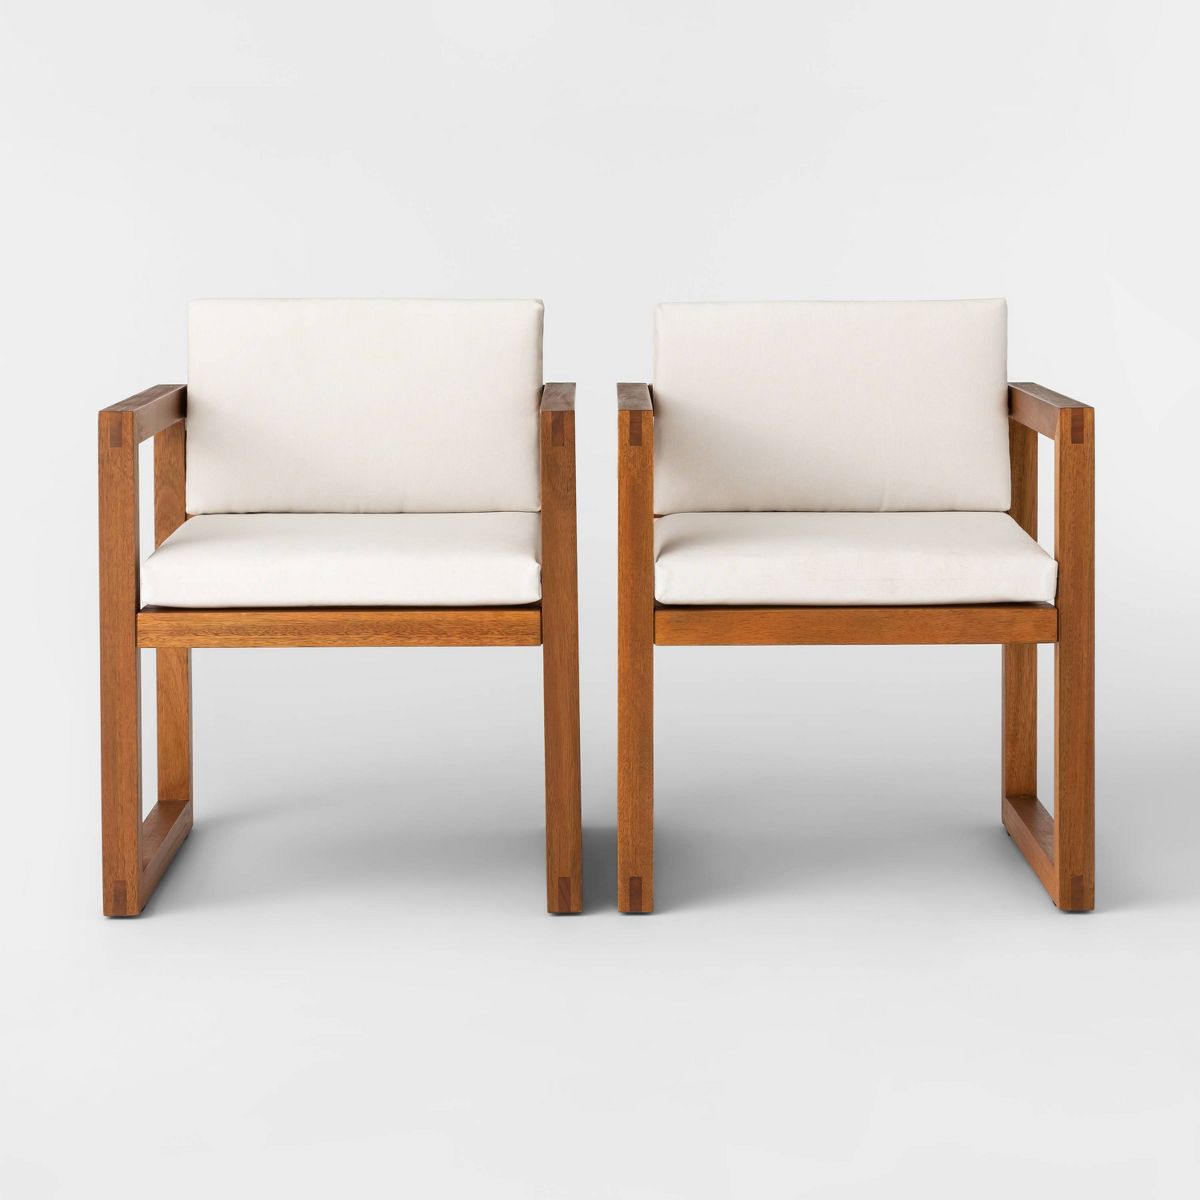 Kaufmann 2pk Wood Patio Arm Chairs - Natural - Project 62™